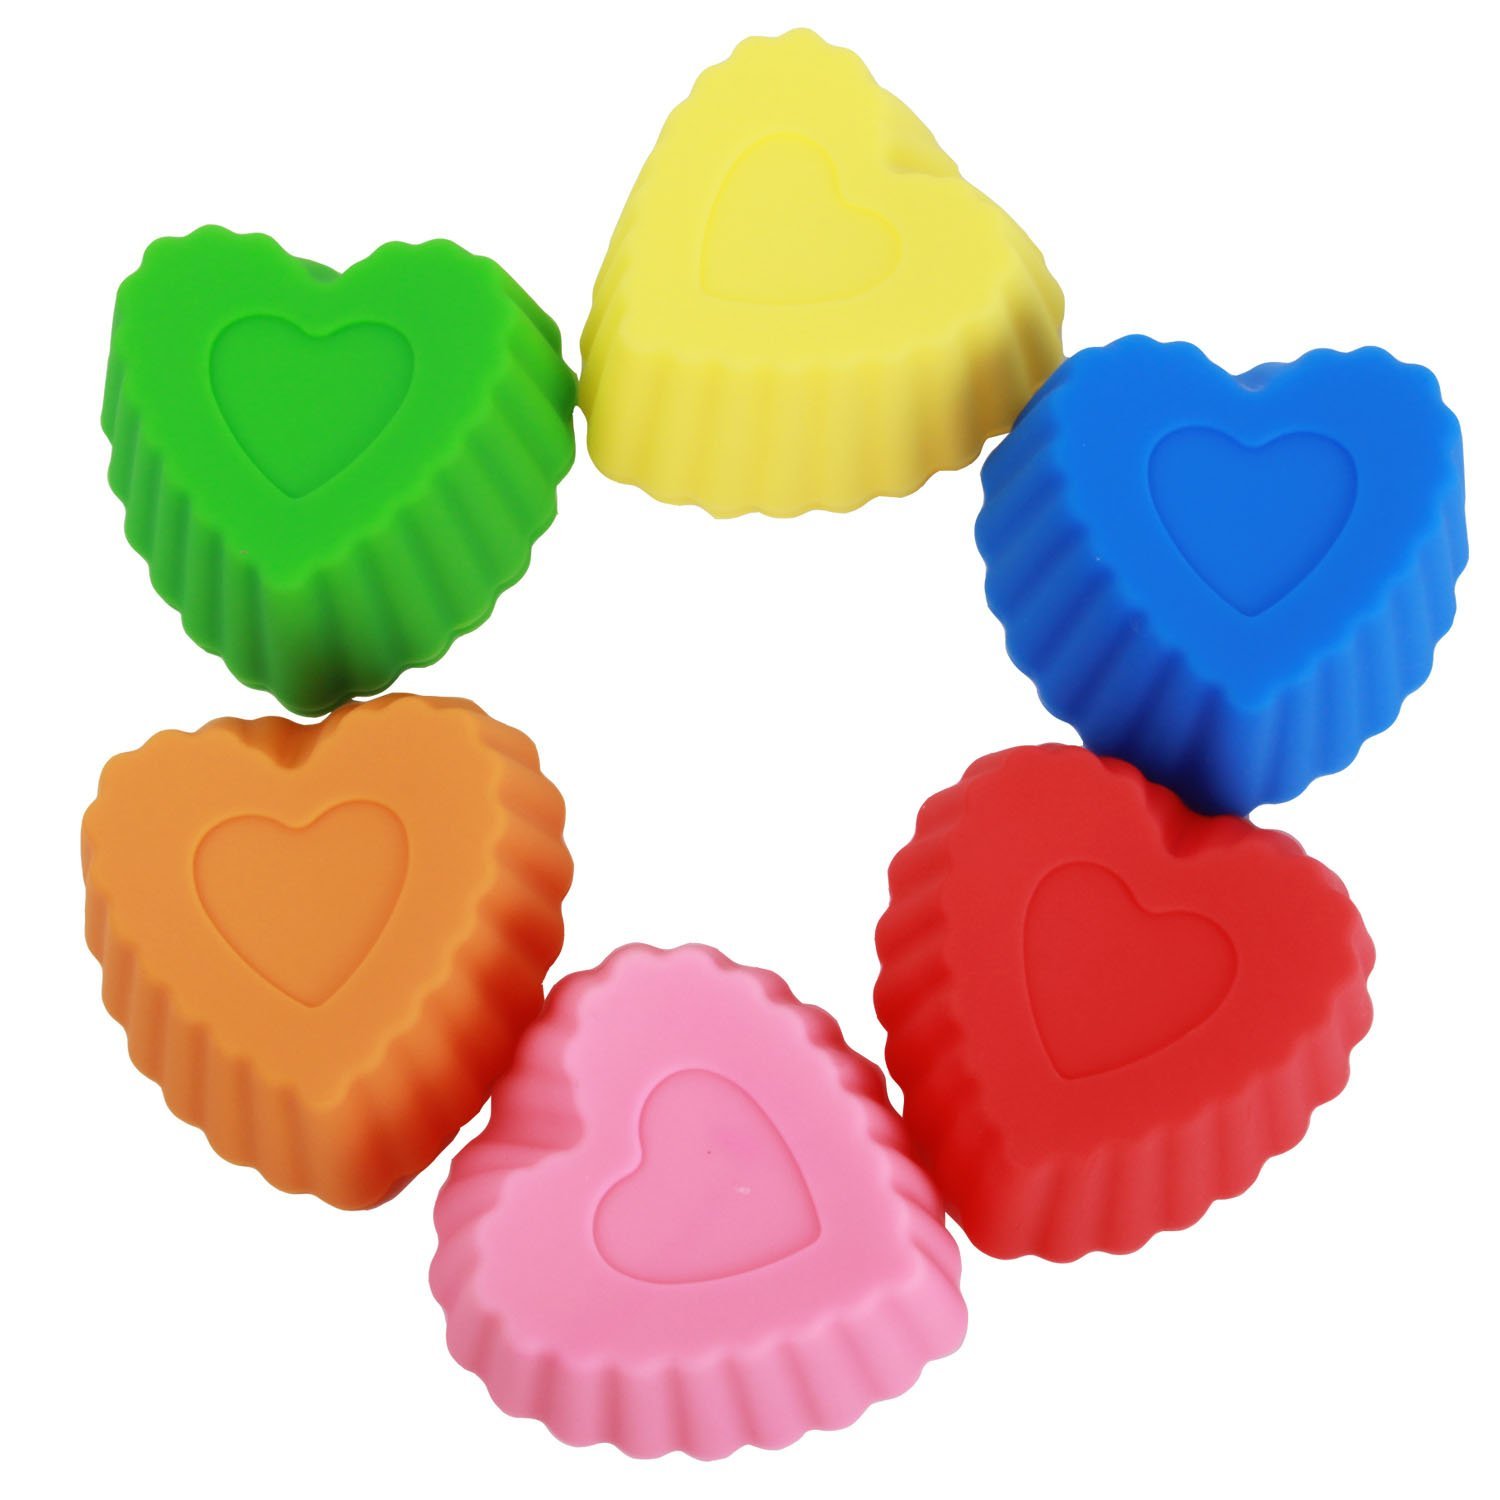 12 Heart-shaped Silicone Cupcake Molds Only $3.59 Shipped!